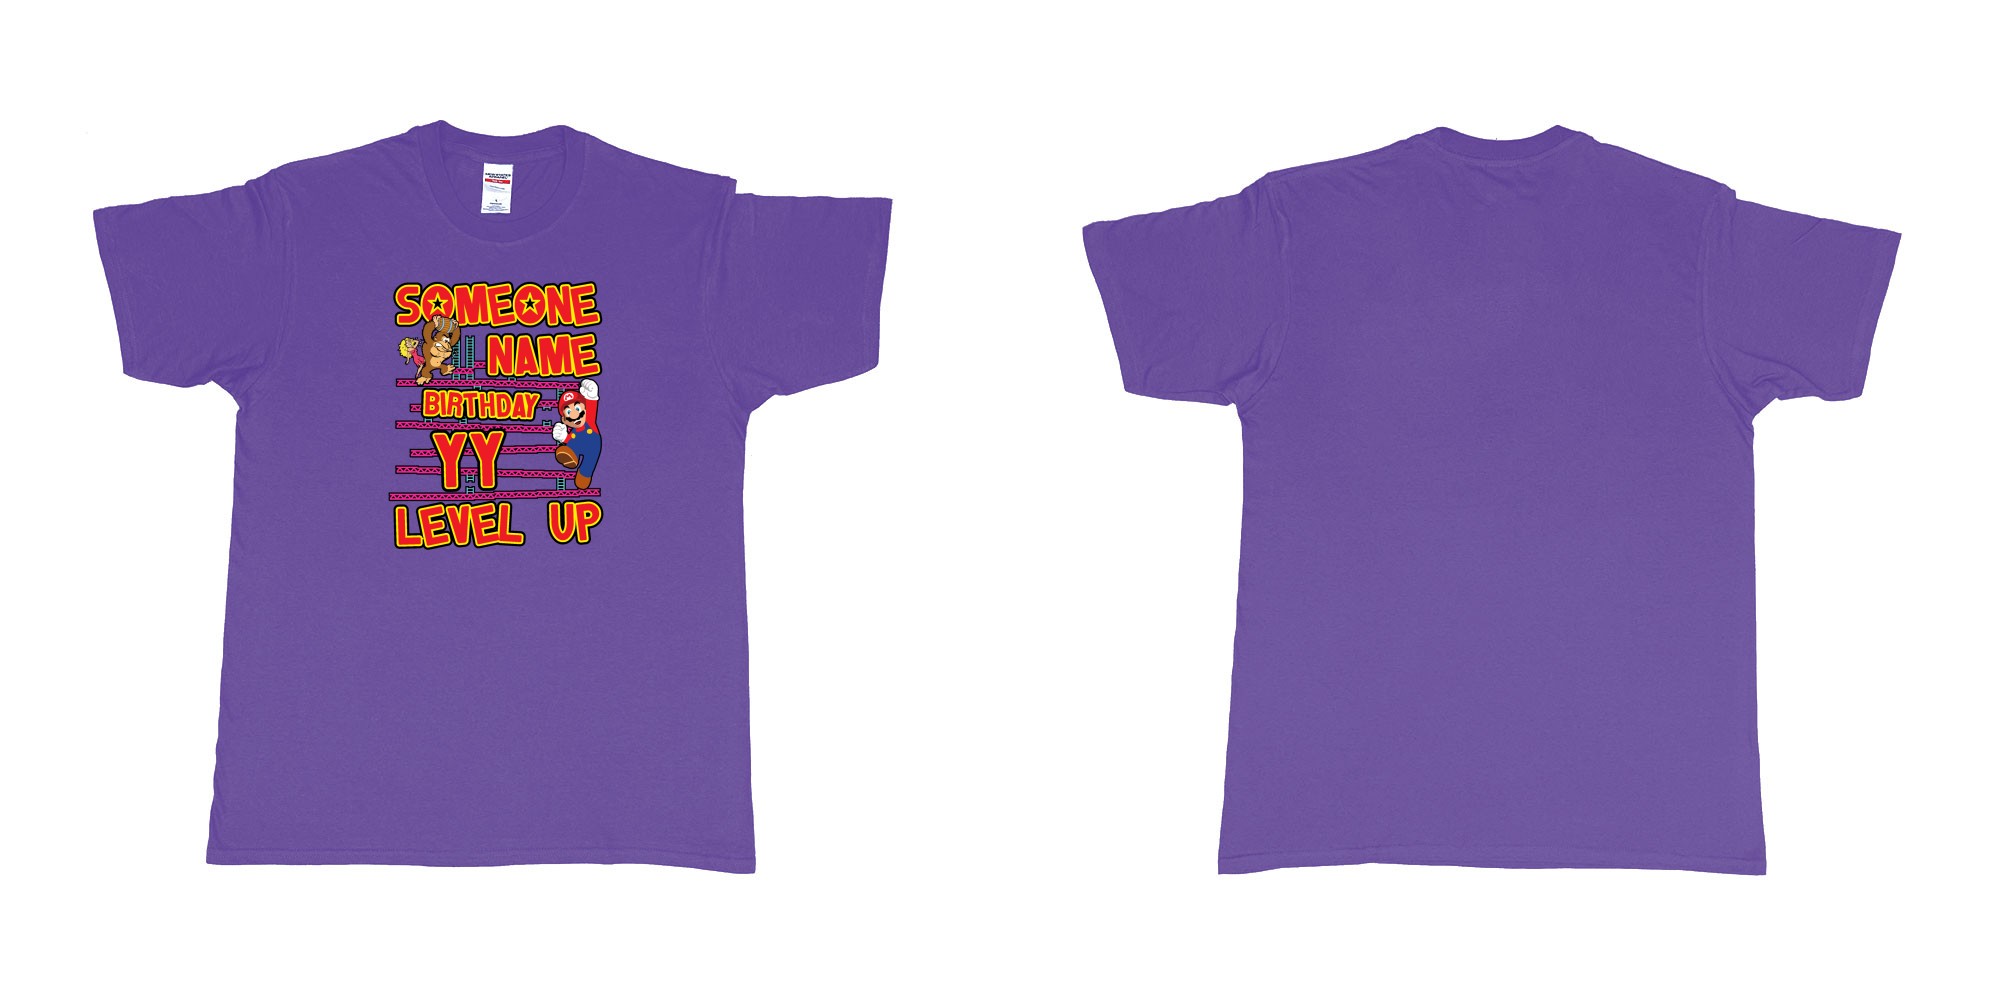 Custom tshirt design donkey kong classic arcade game custom birthday t shirt digital printing bali in fabric color purple choice your own text made in Bali by The Pirate Way